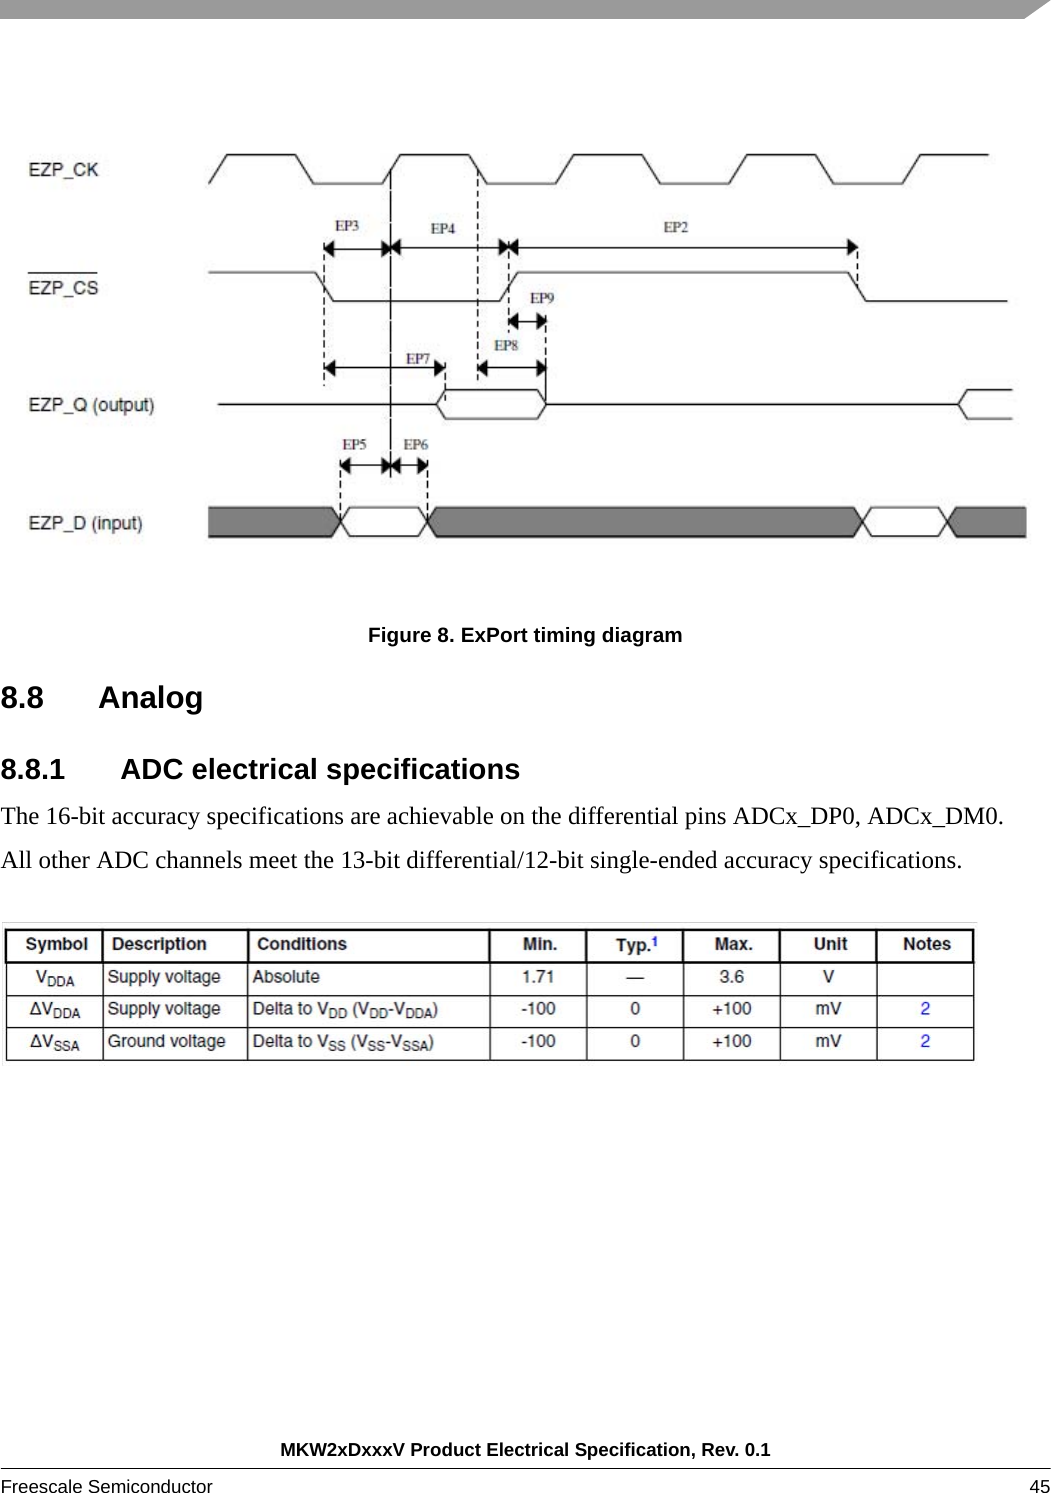 MKW2xDxxxV Product Electrical Specification, Rev. 0.1Freescale Semiconductor 45 Figure 8. ExPort timing diagram8.8 Analog8.8.1 ADC electrical specificationsThe 16-bit accuracy specifications are achievable on the differential pins ADCx_DP0, ADCx_DM0.All other ADC channels meet the 13-bit differential/12-bit single-ended accuracy specifications.